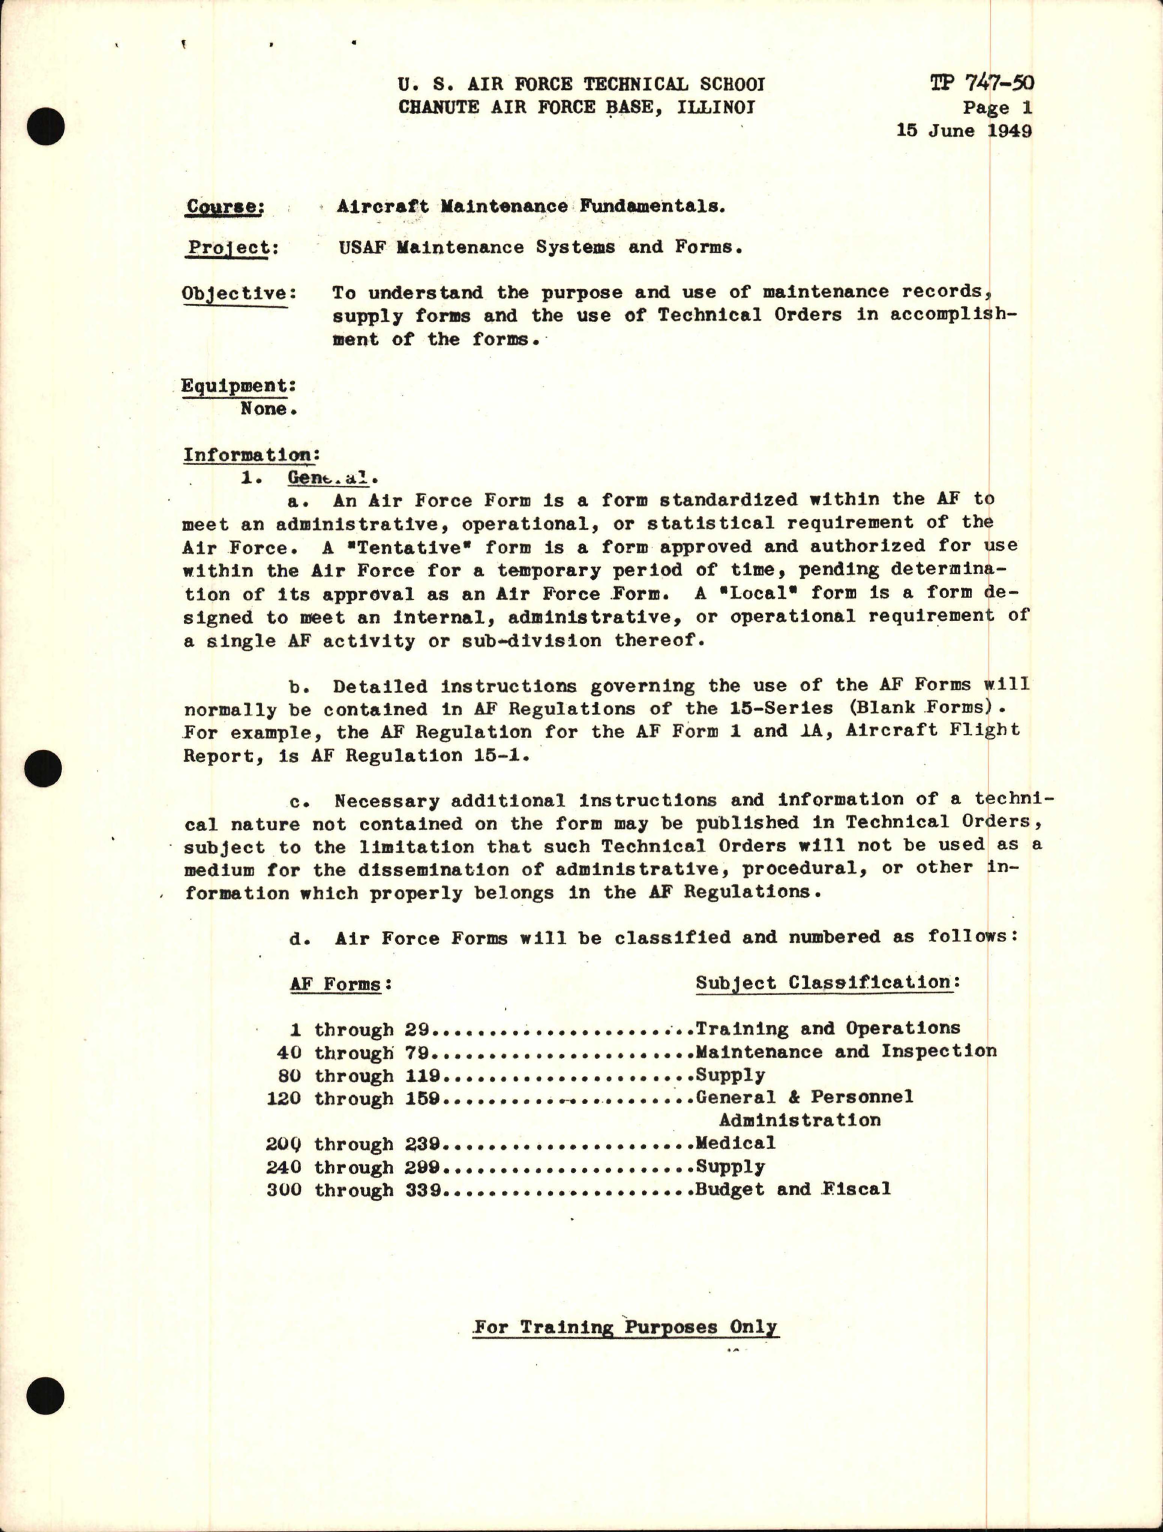 Sample page 1 from AirCorps Library document: Training Project, USAF Maintenance Systems and Forms